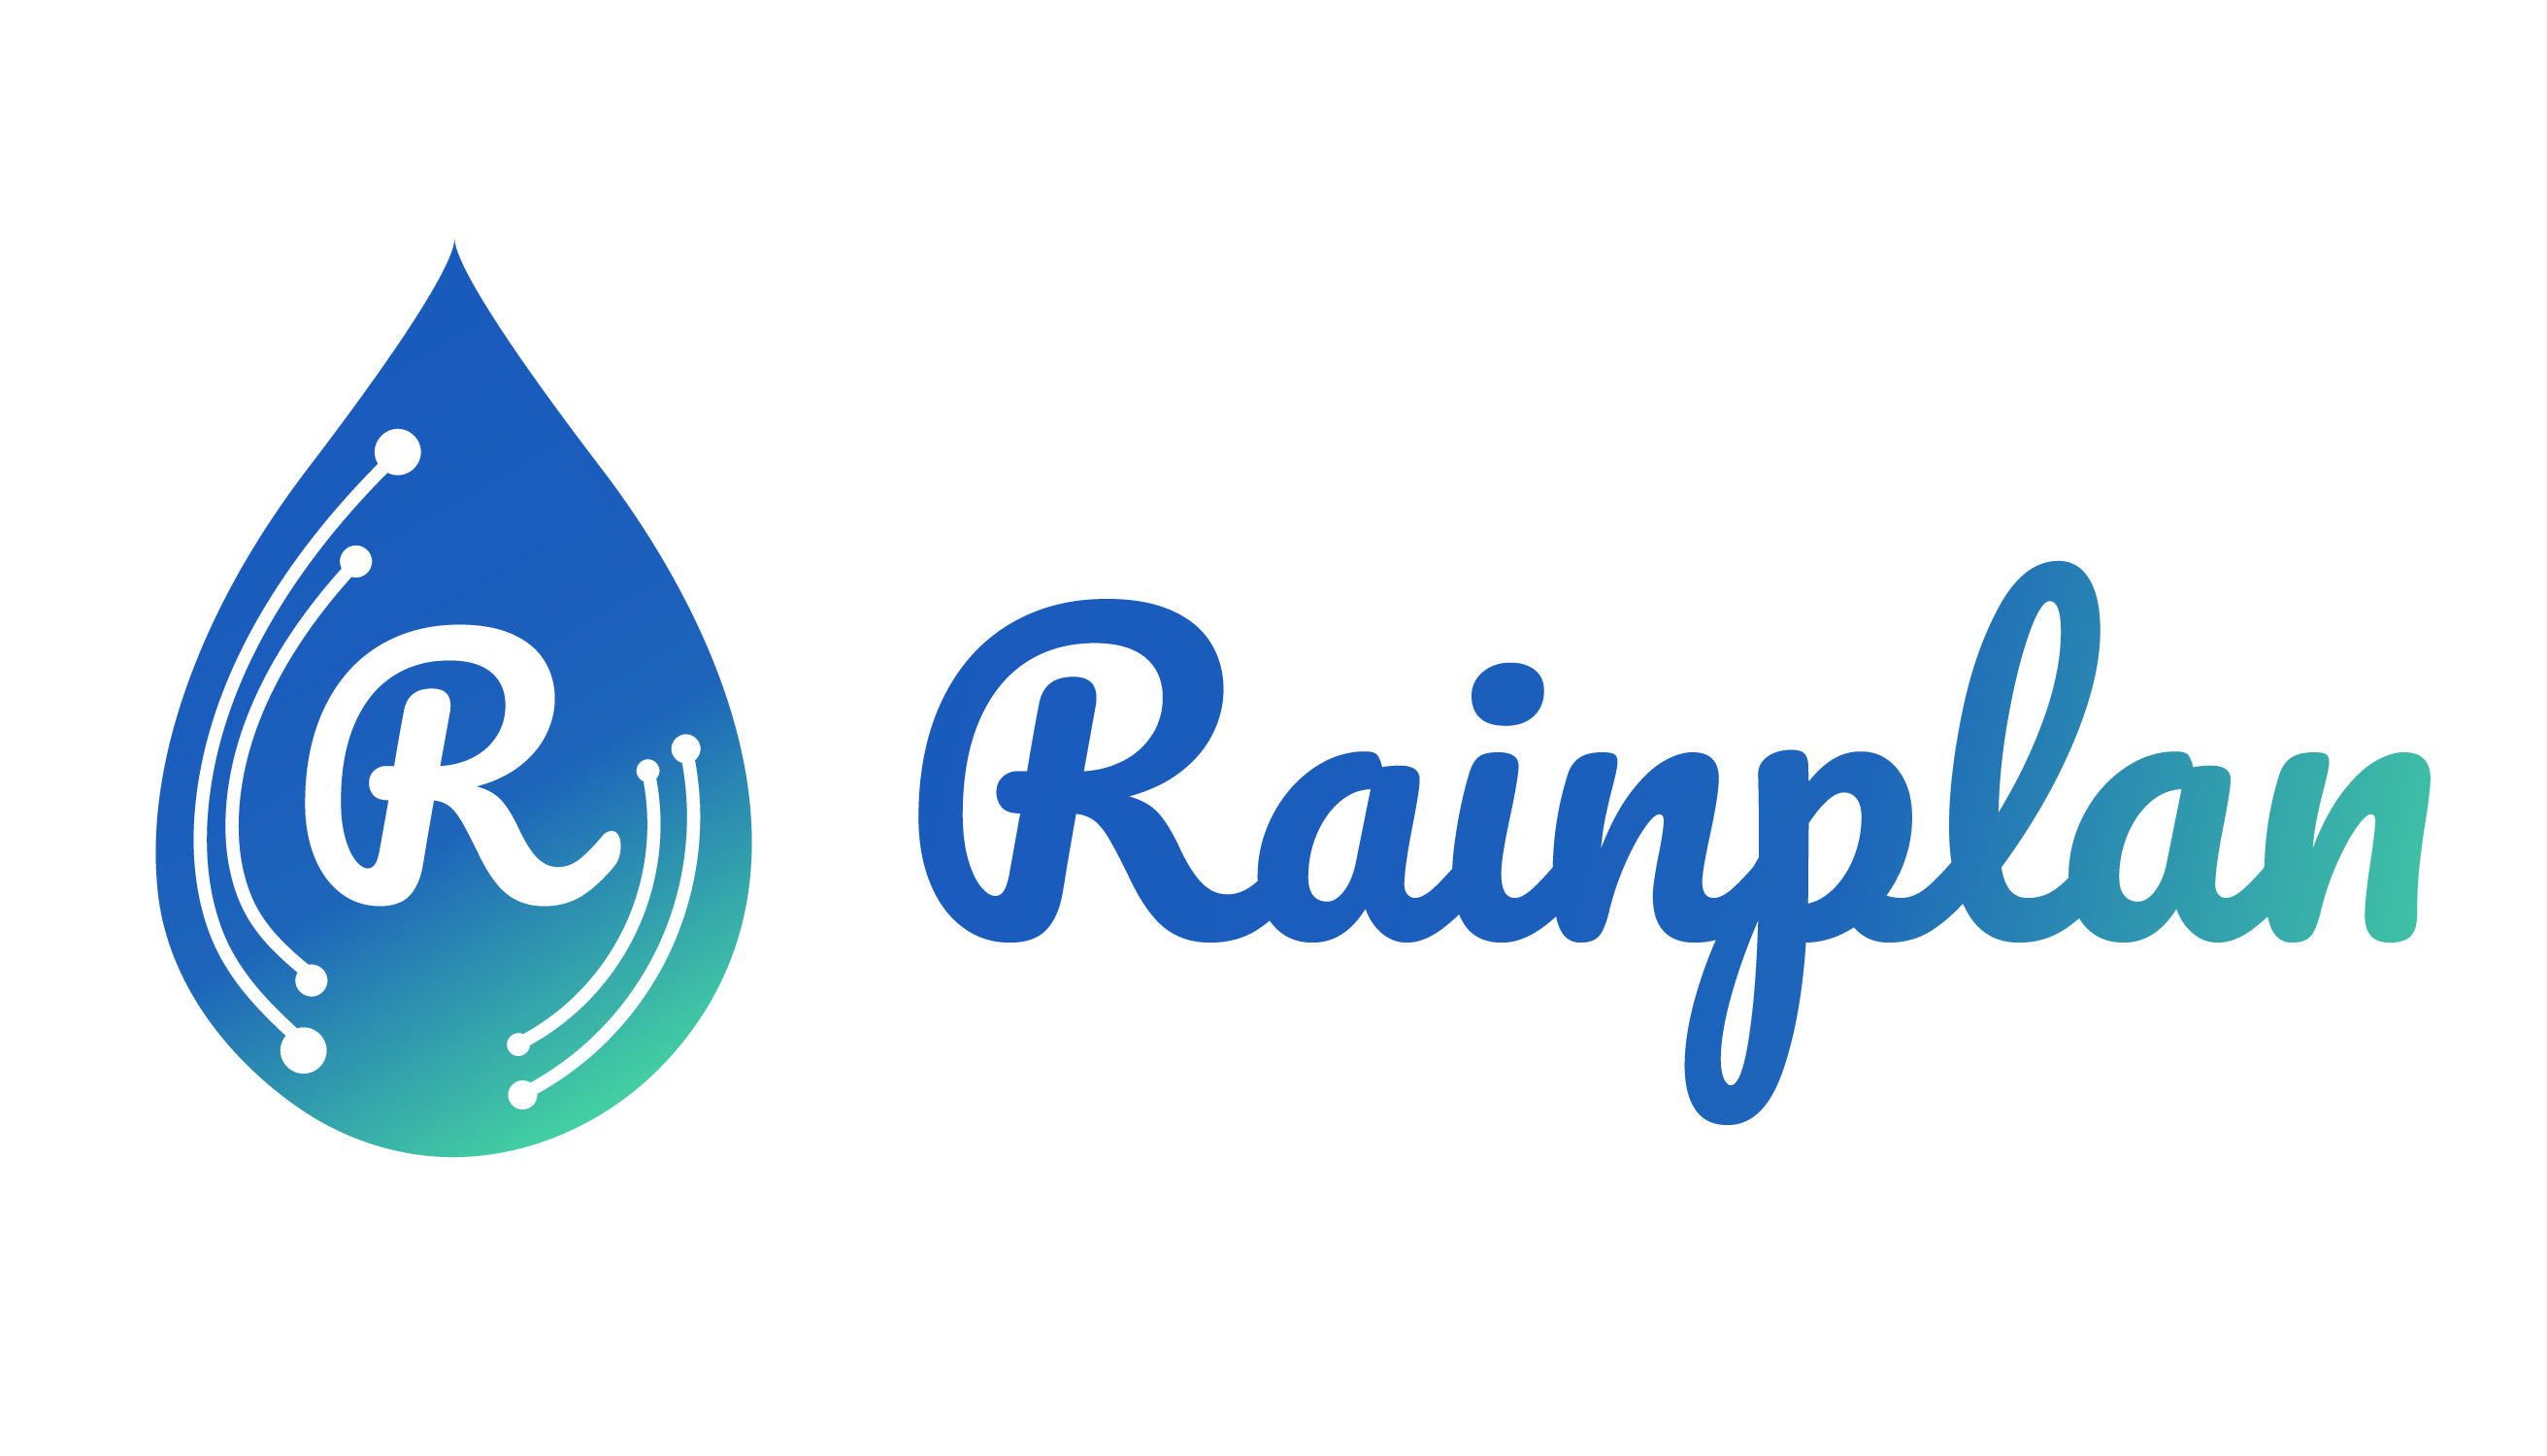 Rainplan | A Stormwater & Nature Based Solutions Marketplace